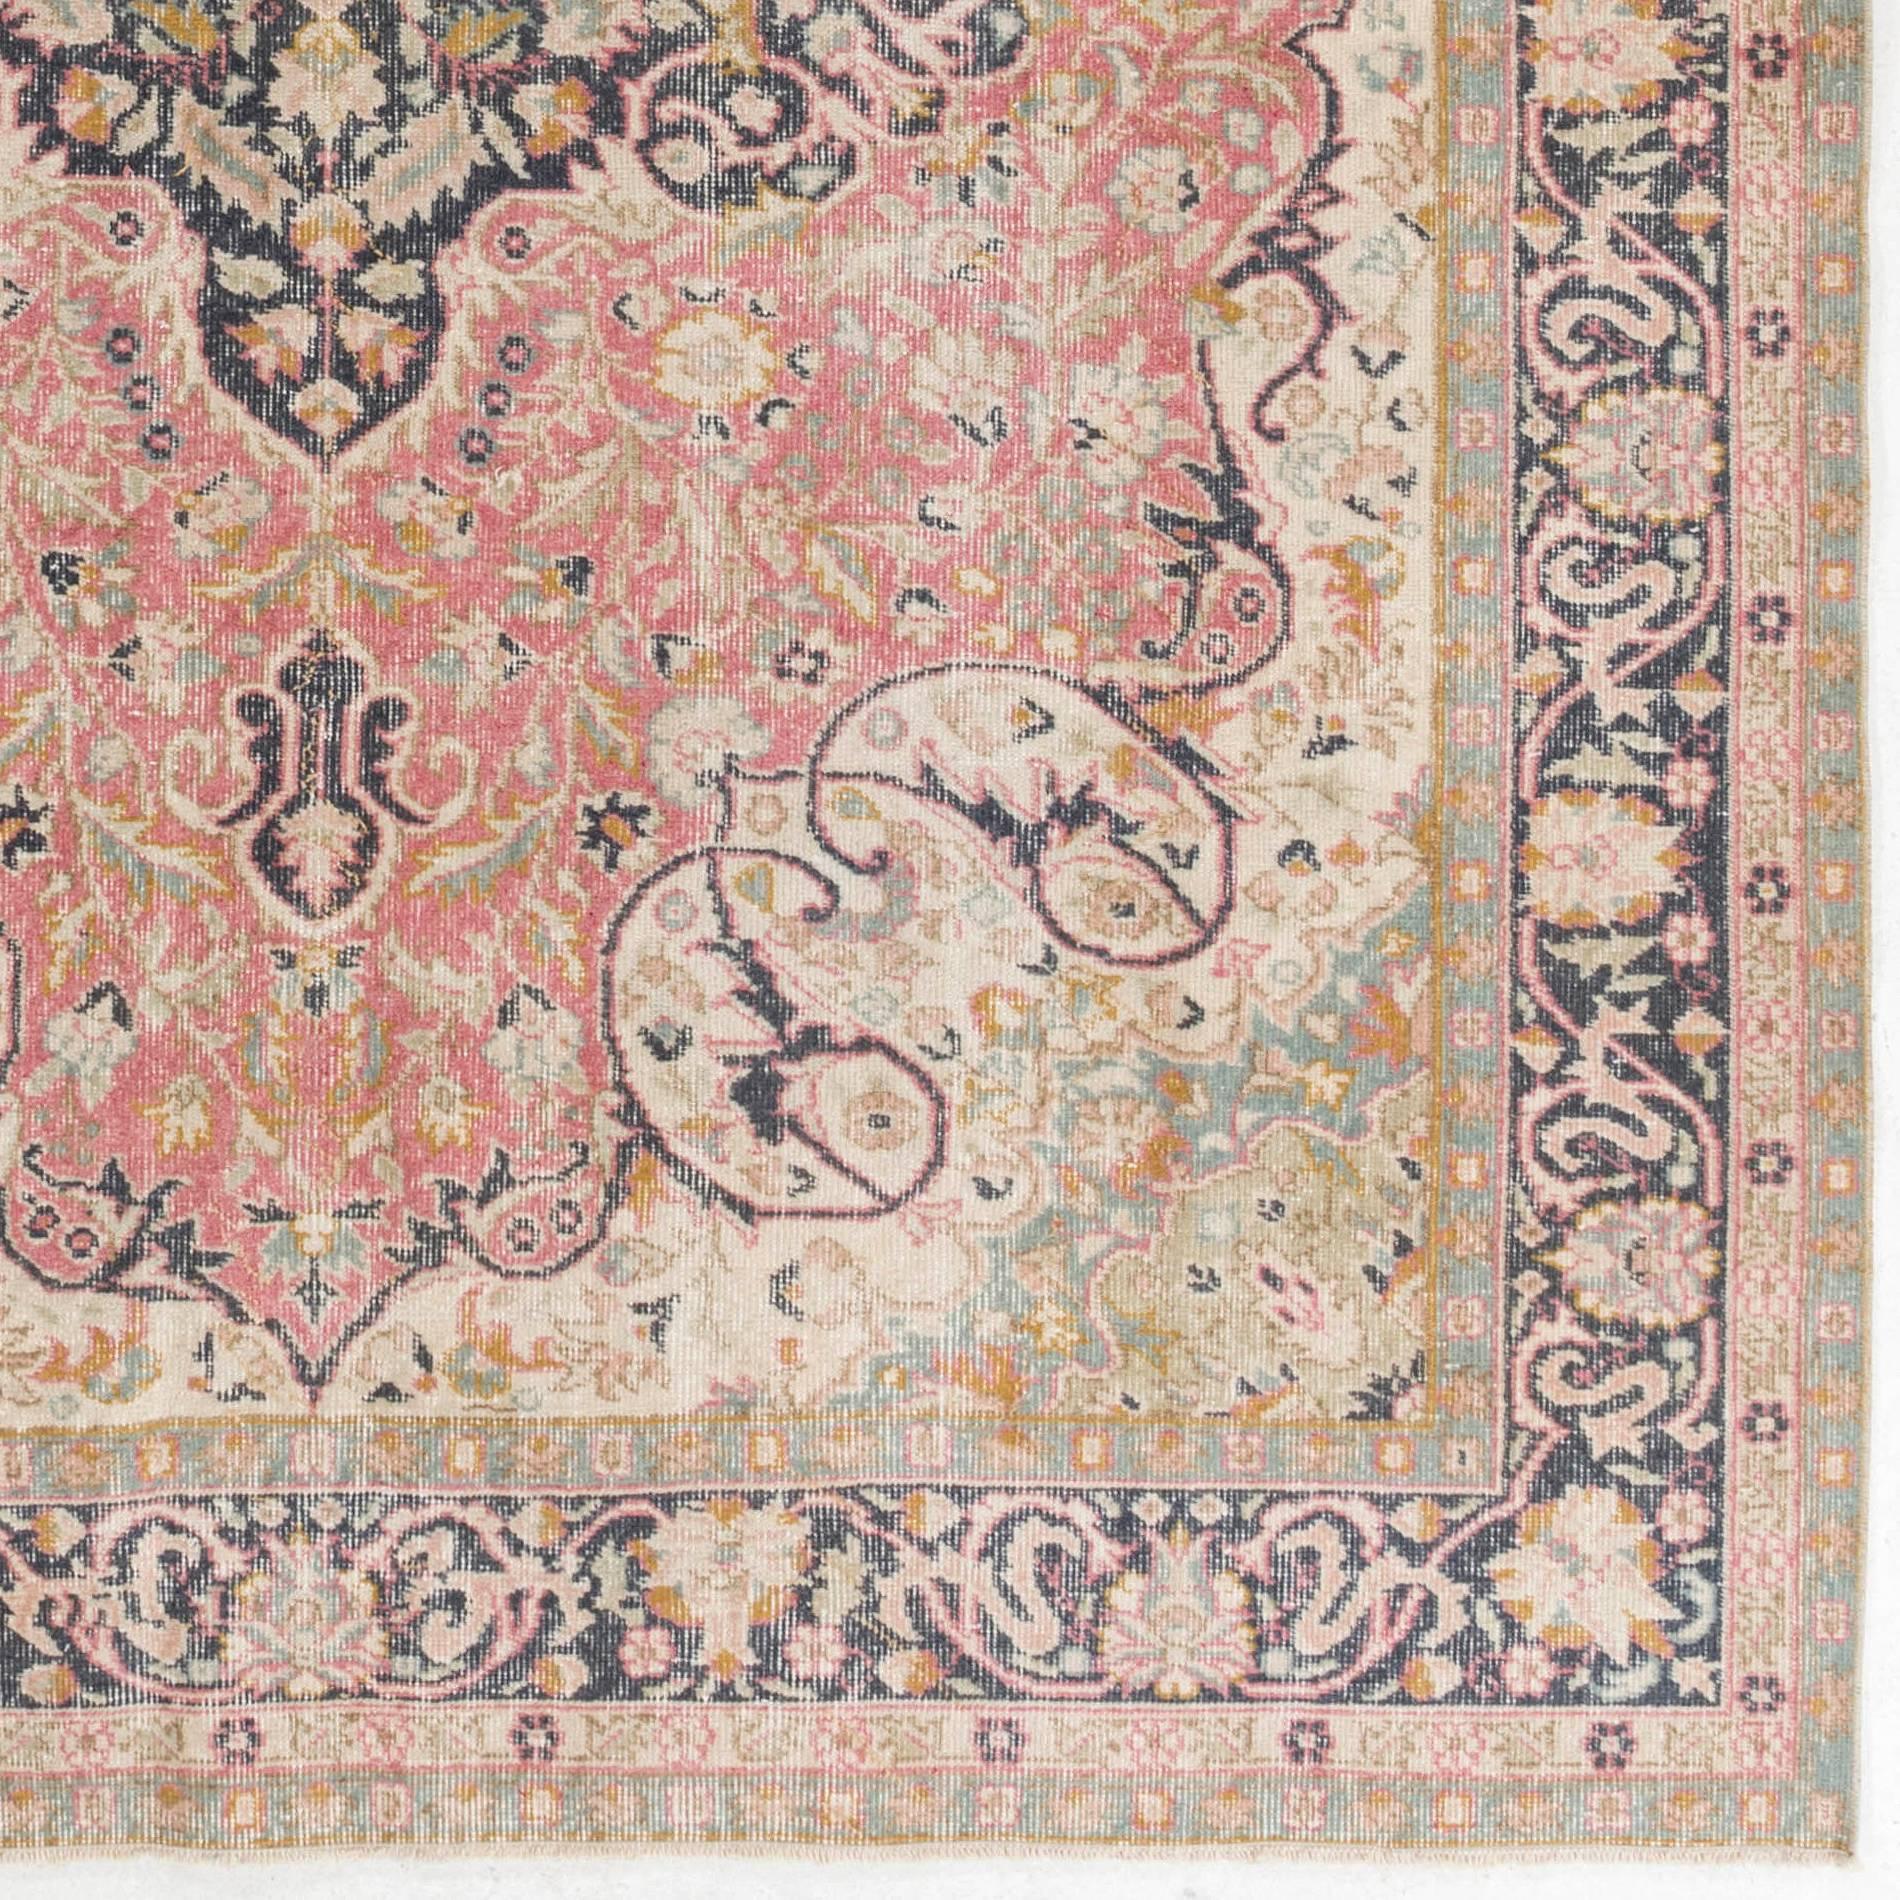 7x10 Ft Fine Semi-Antique Hand-Knotted Turkish Wool Rug in Soft Colors  In Good Condition For Sale In Philadelphia, PA